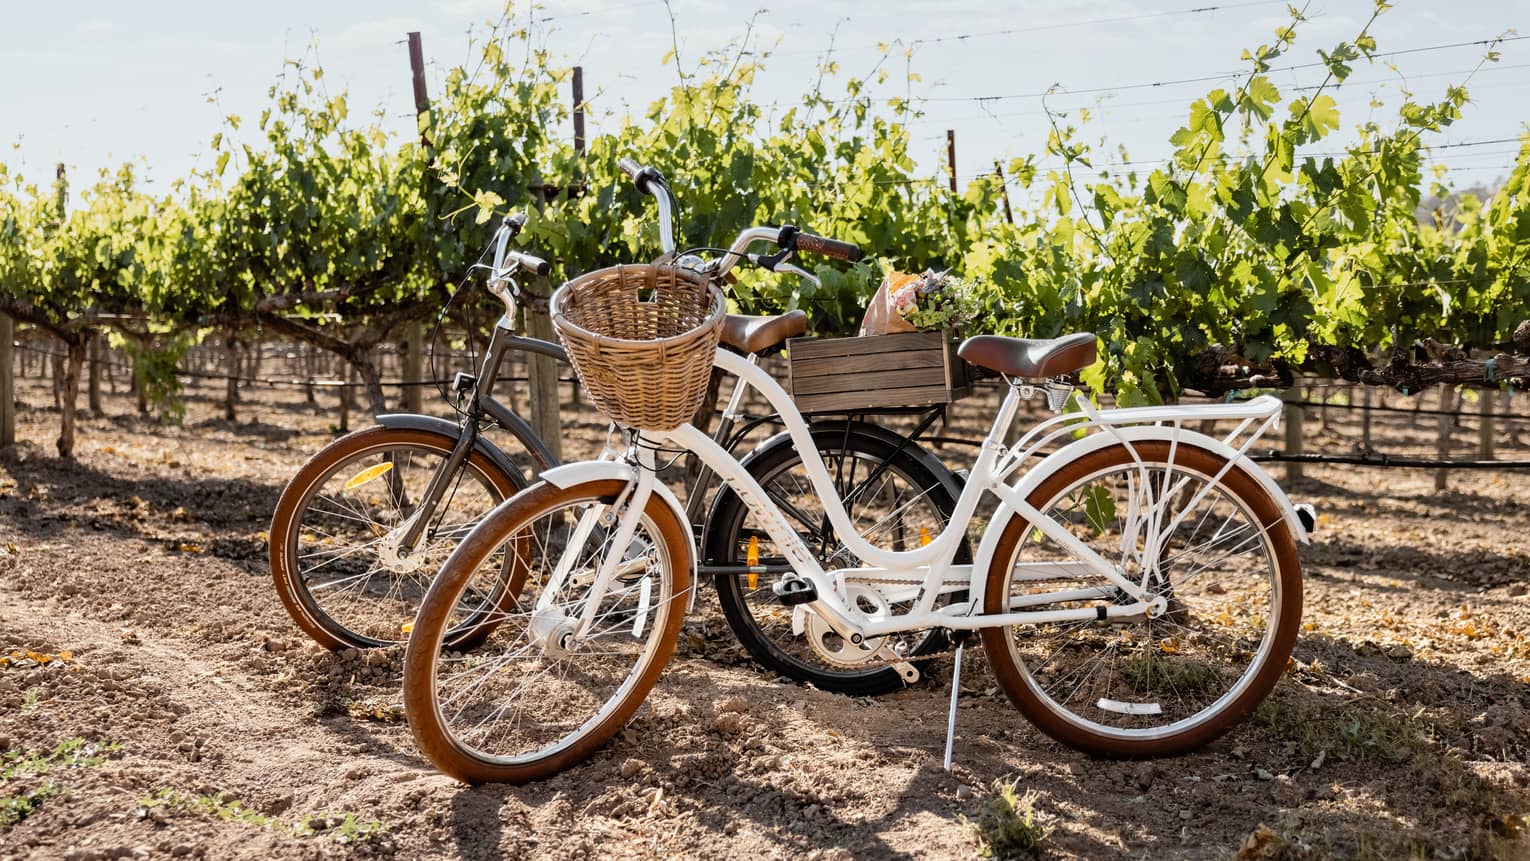 Two bikes rest against vineyards